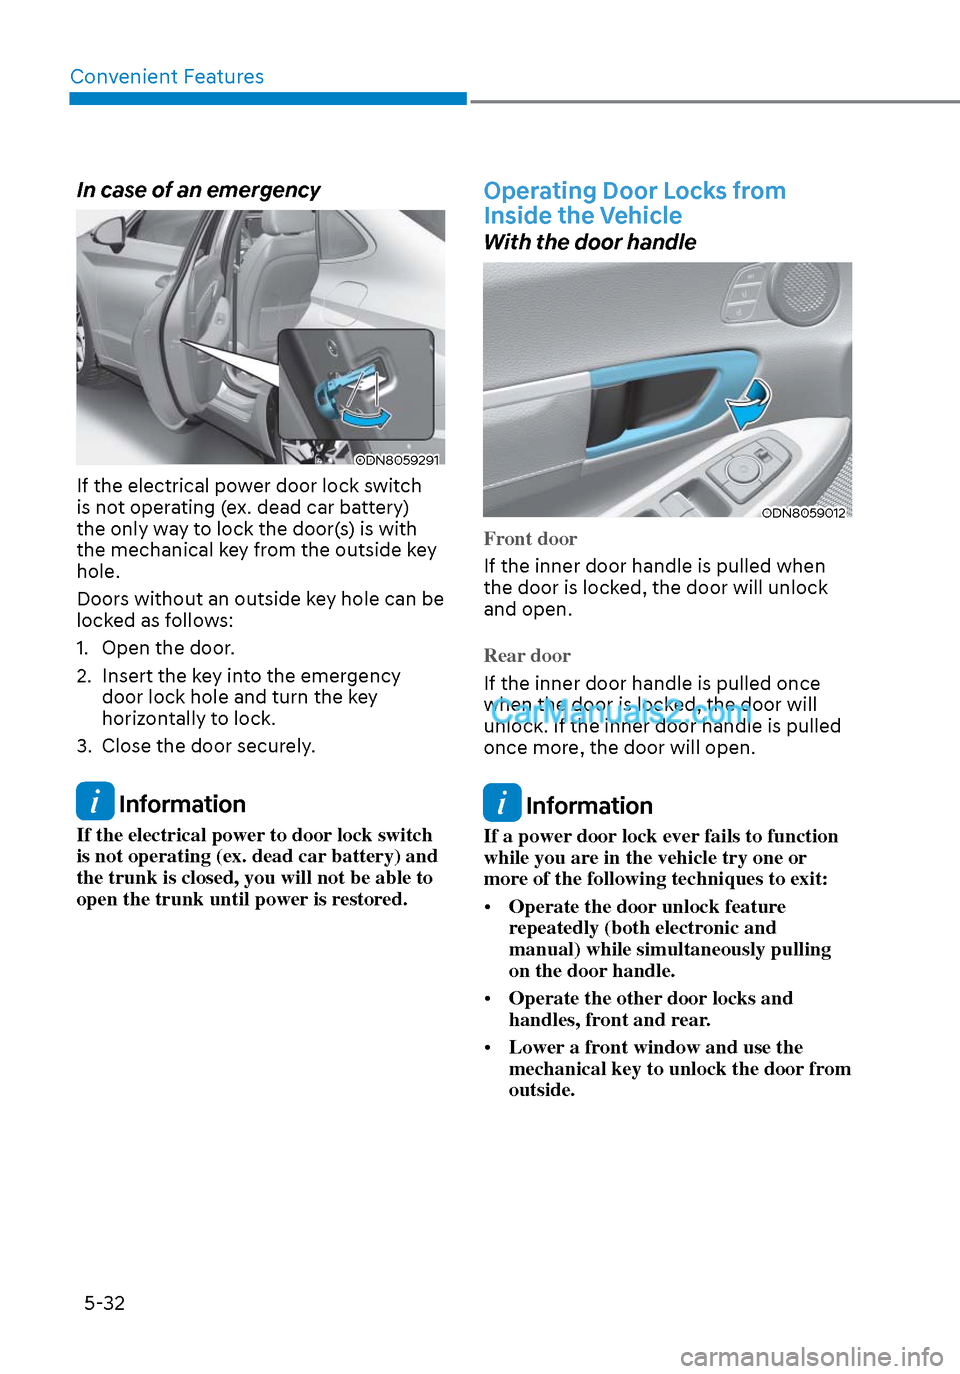 Hyundai Sonata 2020 User Guide Convenient Features5-32
In case of an emergency 
ODN8059291ODN8059291
If the electrical power door lock switch 
is not operating (ex. dead car battery) 
the only way to lock the door(s) is with 
the m